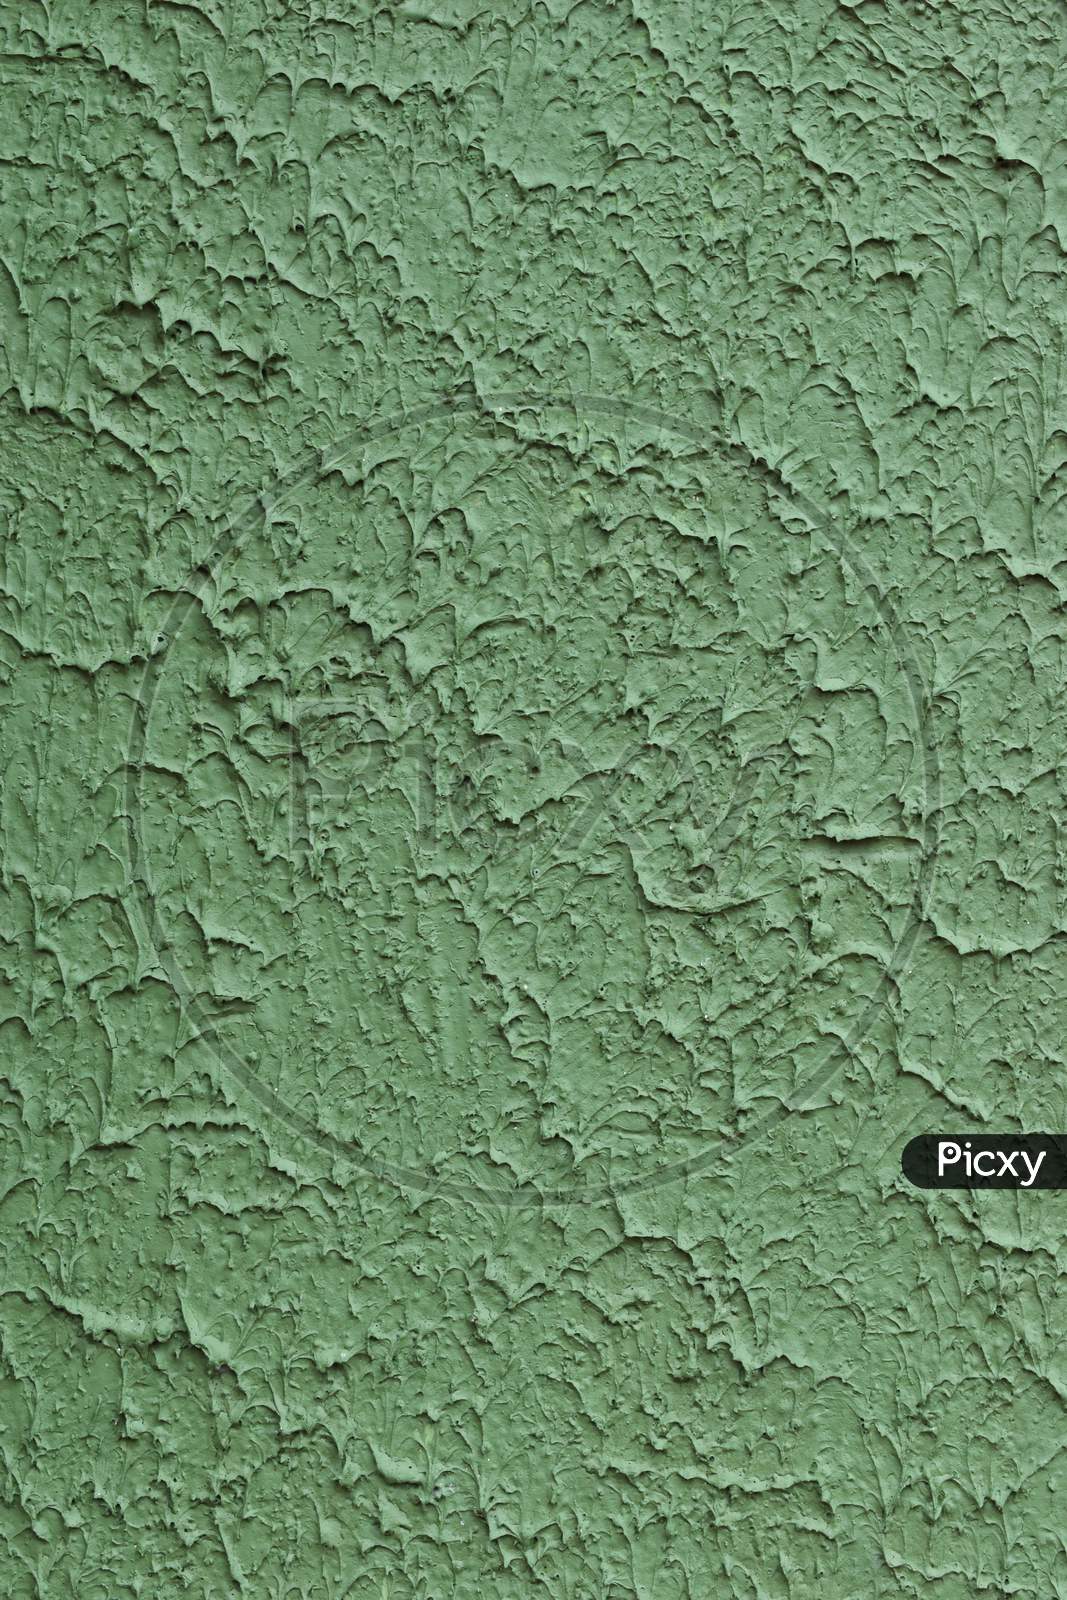 Textured green rough surface background.